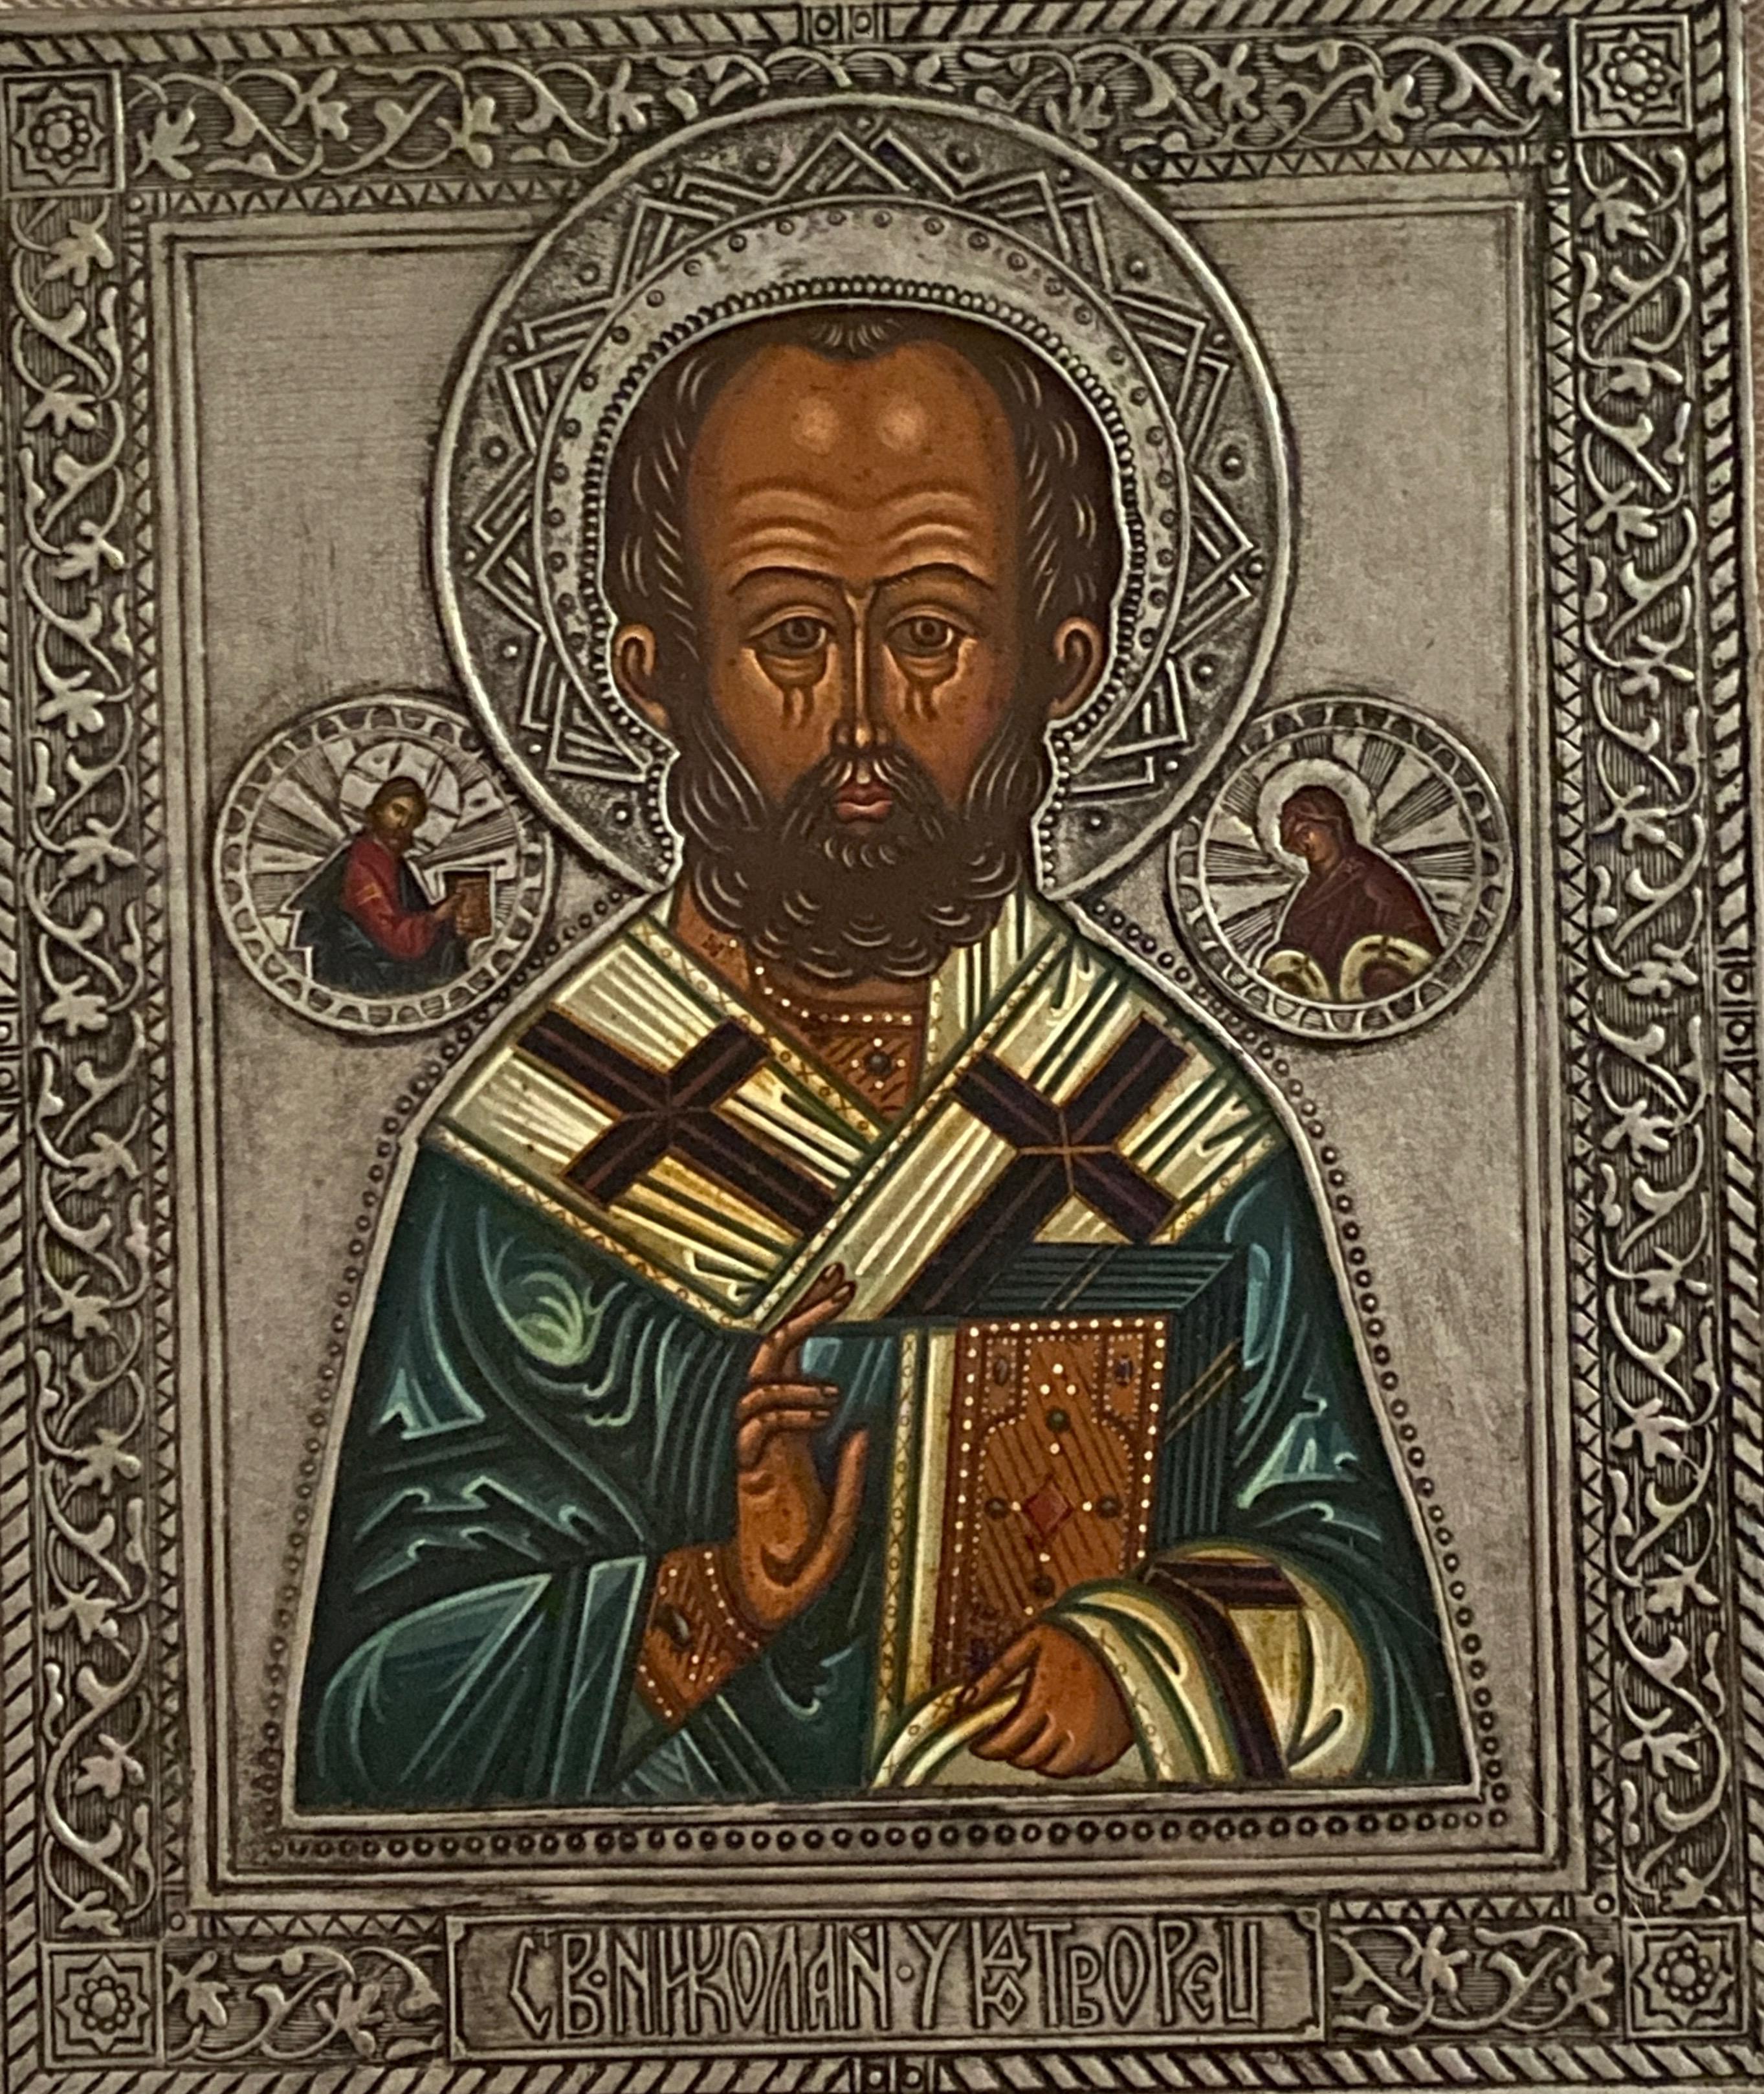 Saint Nicolas in the style of Russian icons of the 18th century. With Oklad